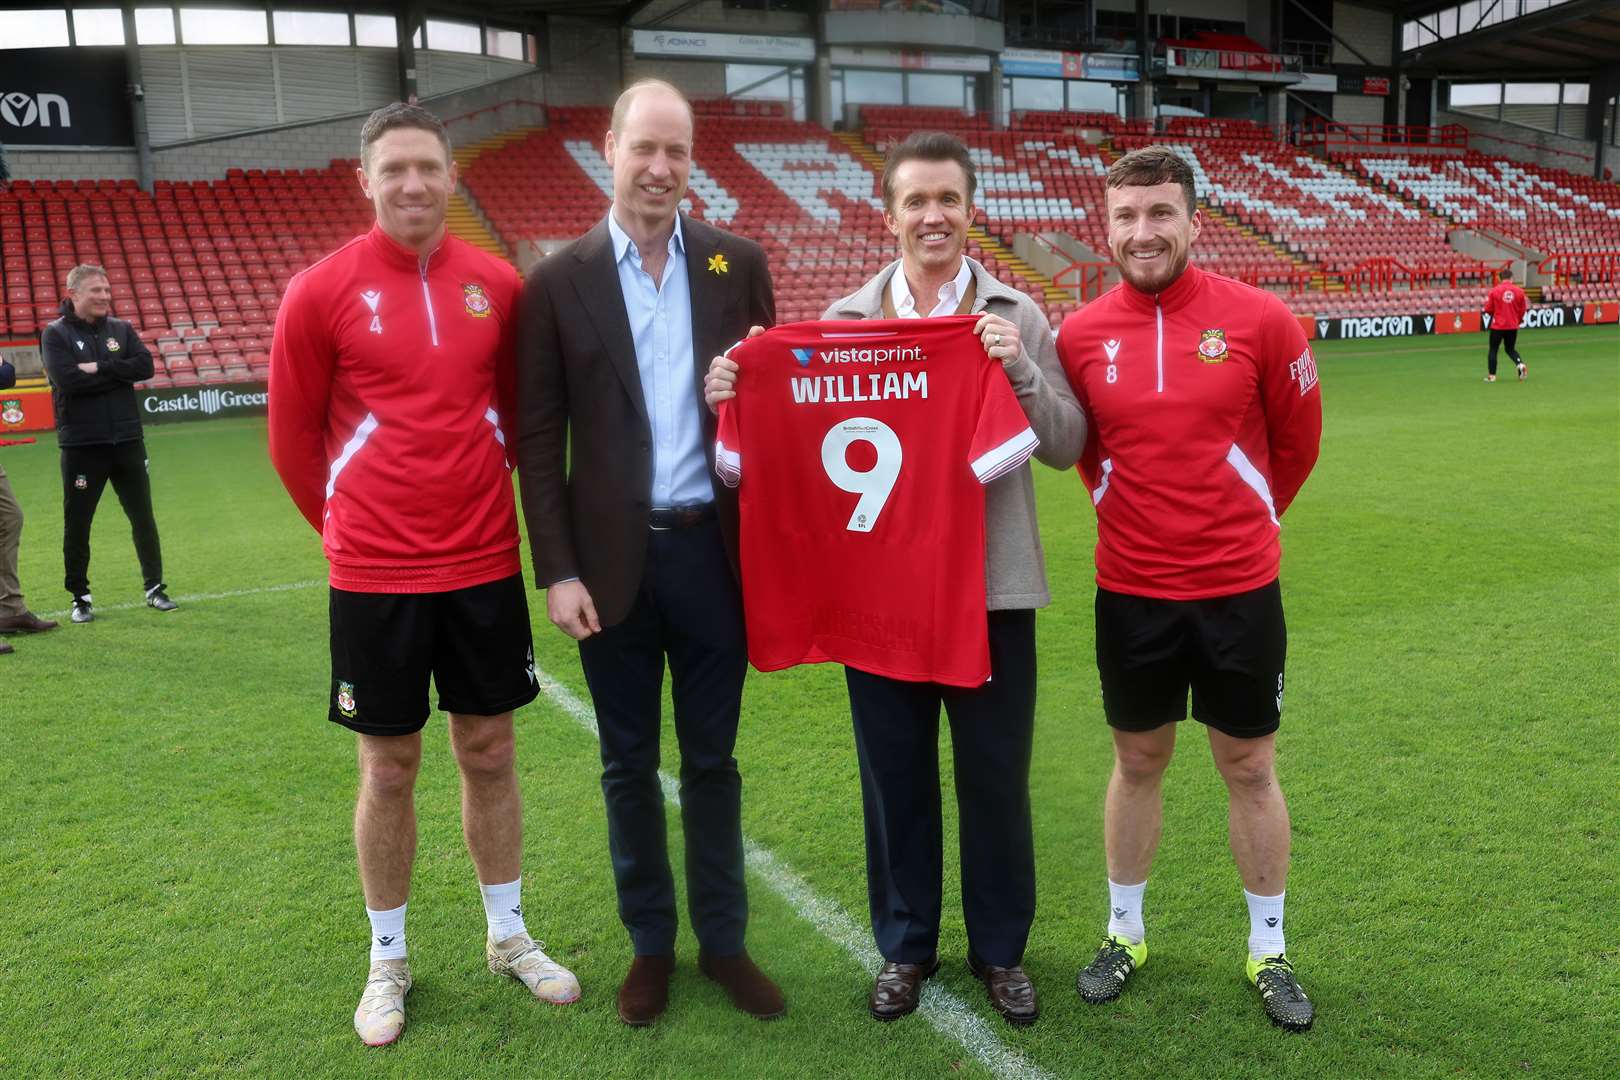 William with his personalised Wrexham AFC shirt, meeting club chairman Ben Tozer, Rob McElhenney and captain Luke Young (Chris Jackson/PA)